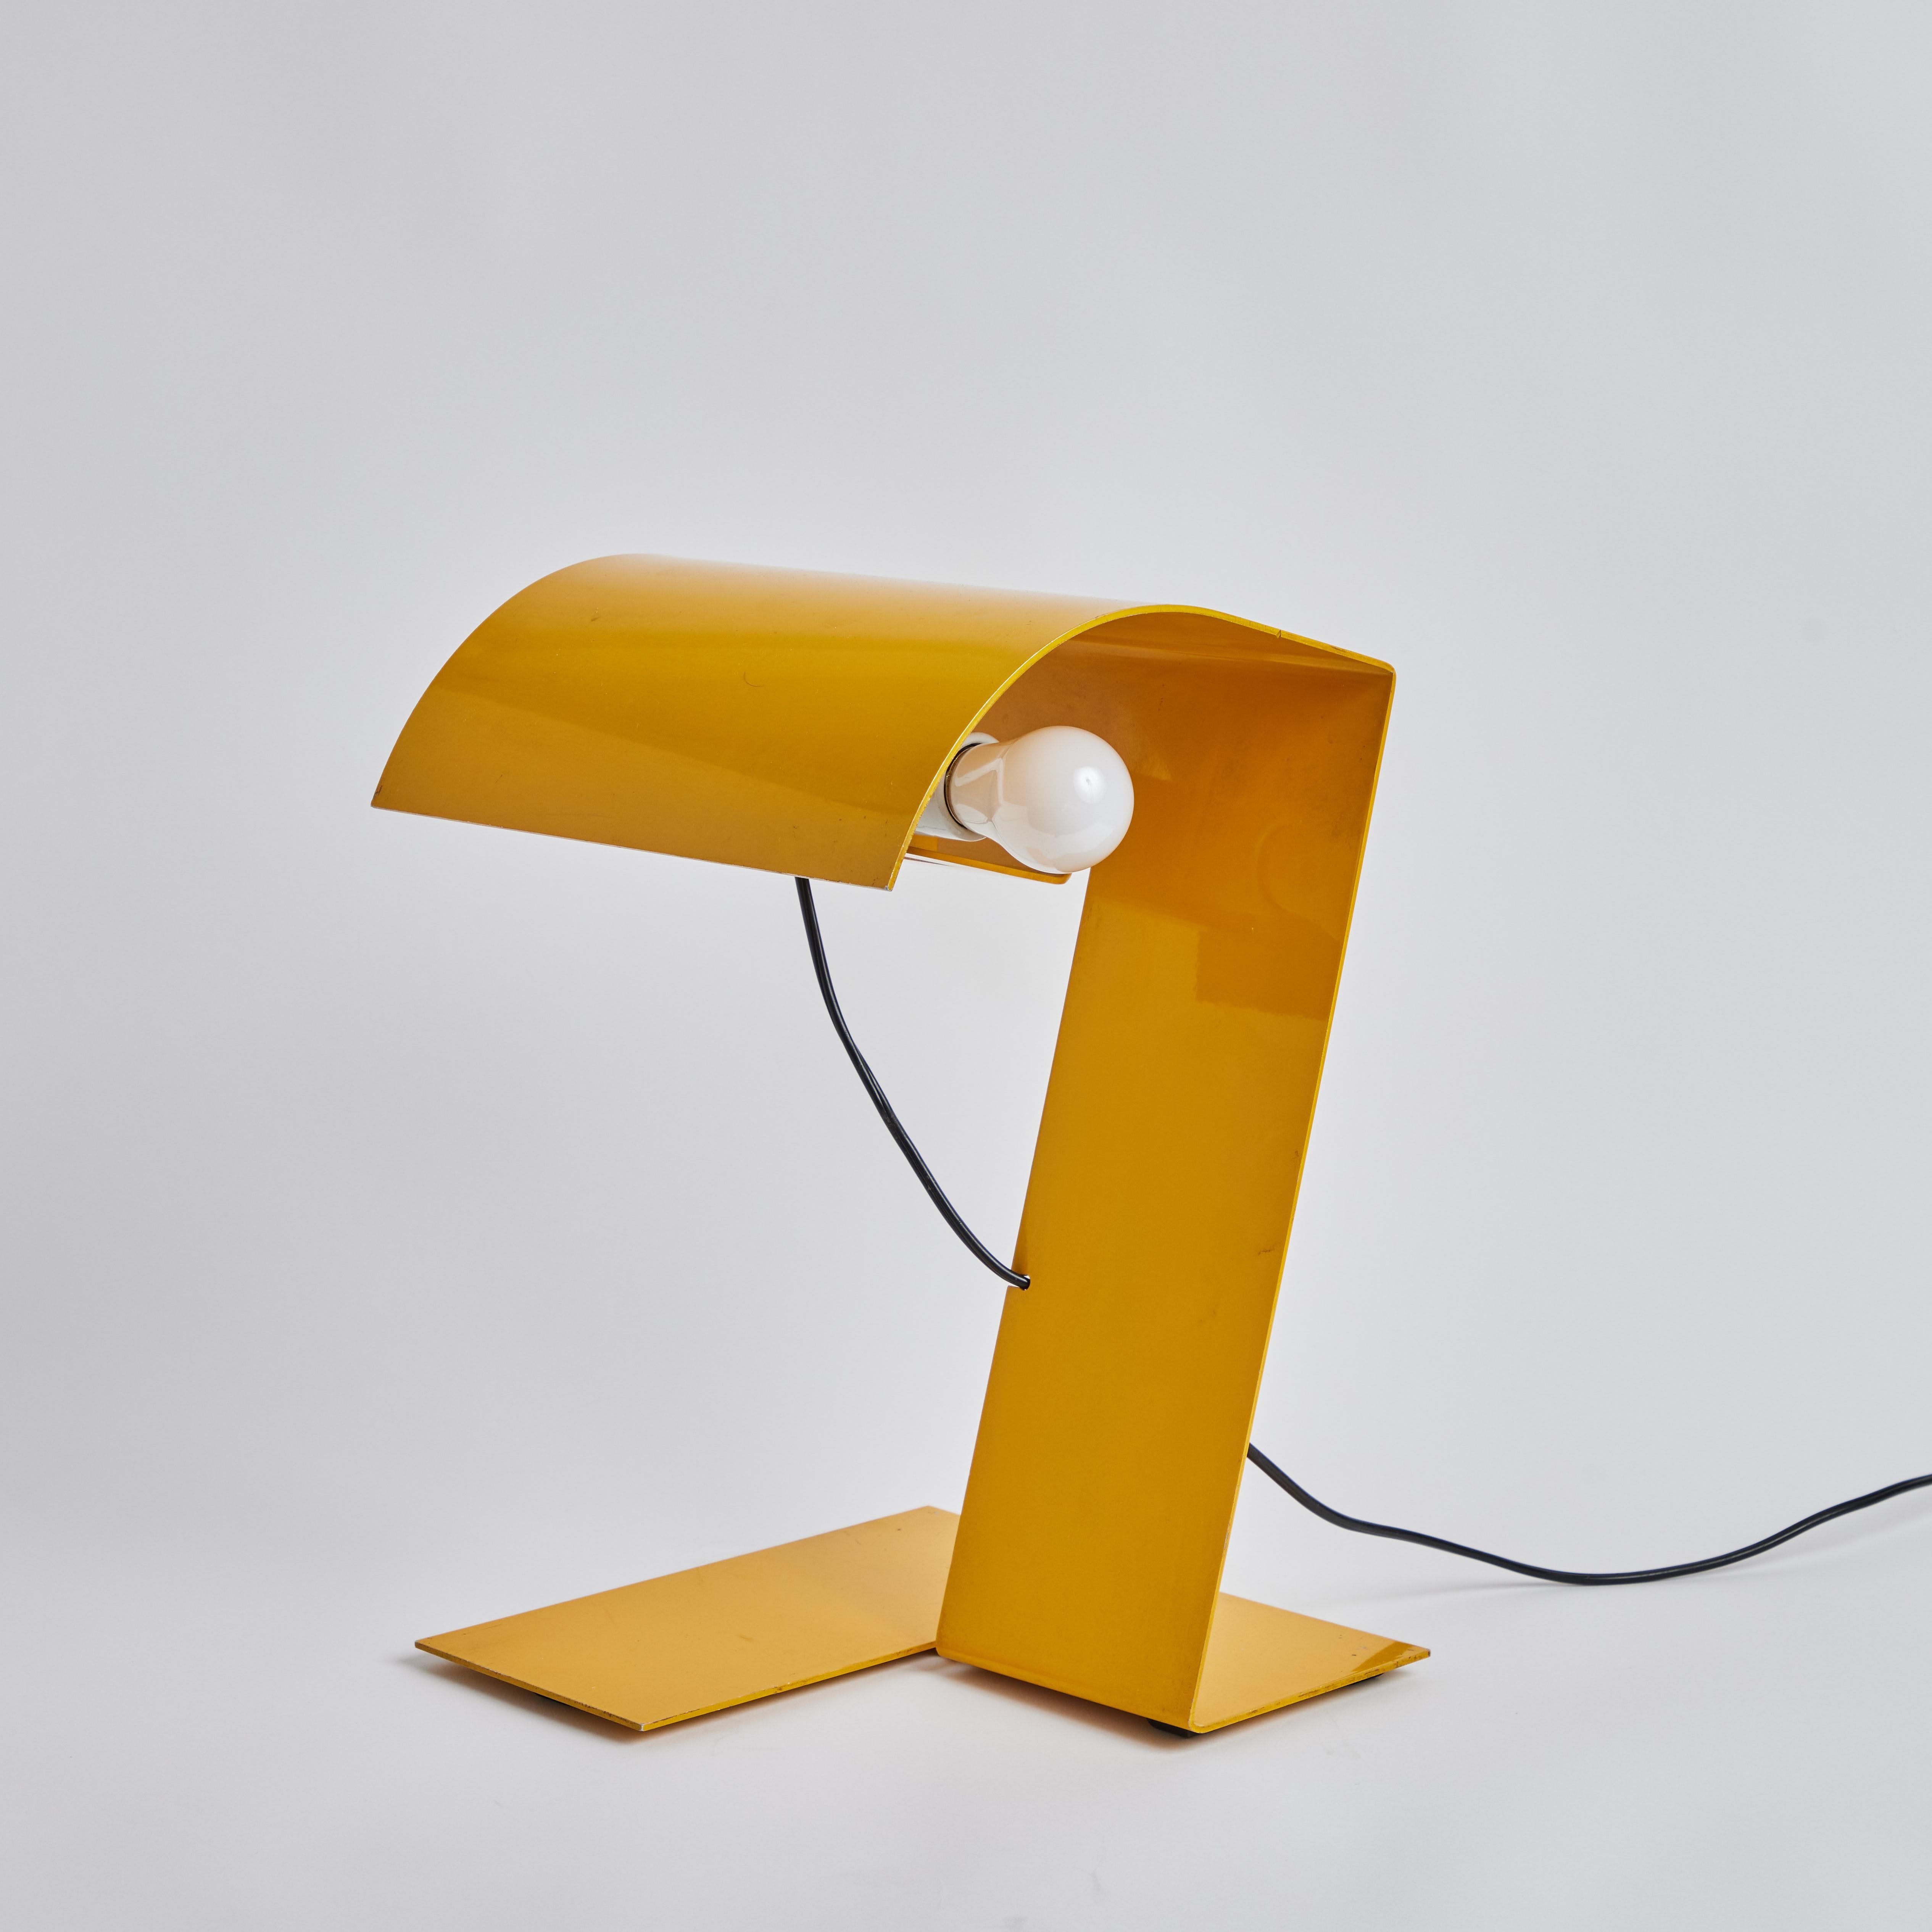 1972 Stilnovo 'Blitz' Table Lamp in Yellow by Trabucco, Vecchi & Volpi In Good Condition For Sale In Glendale, CA